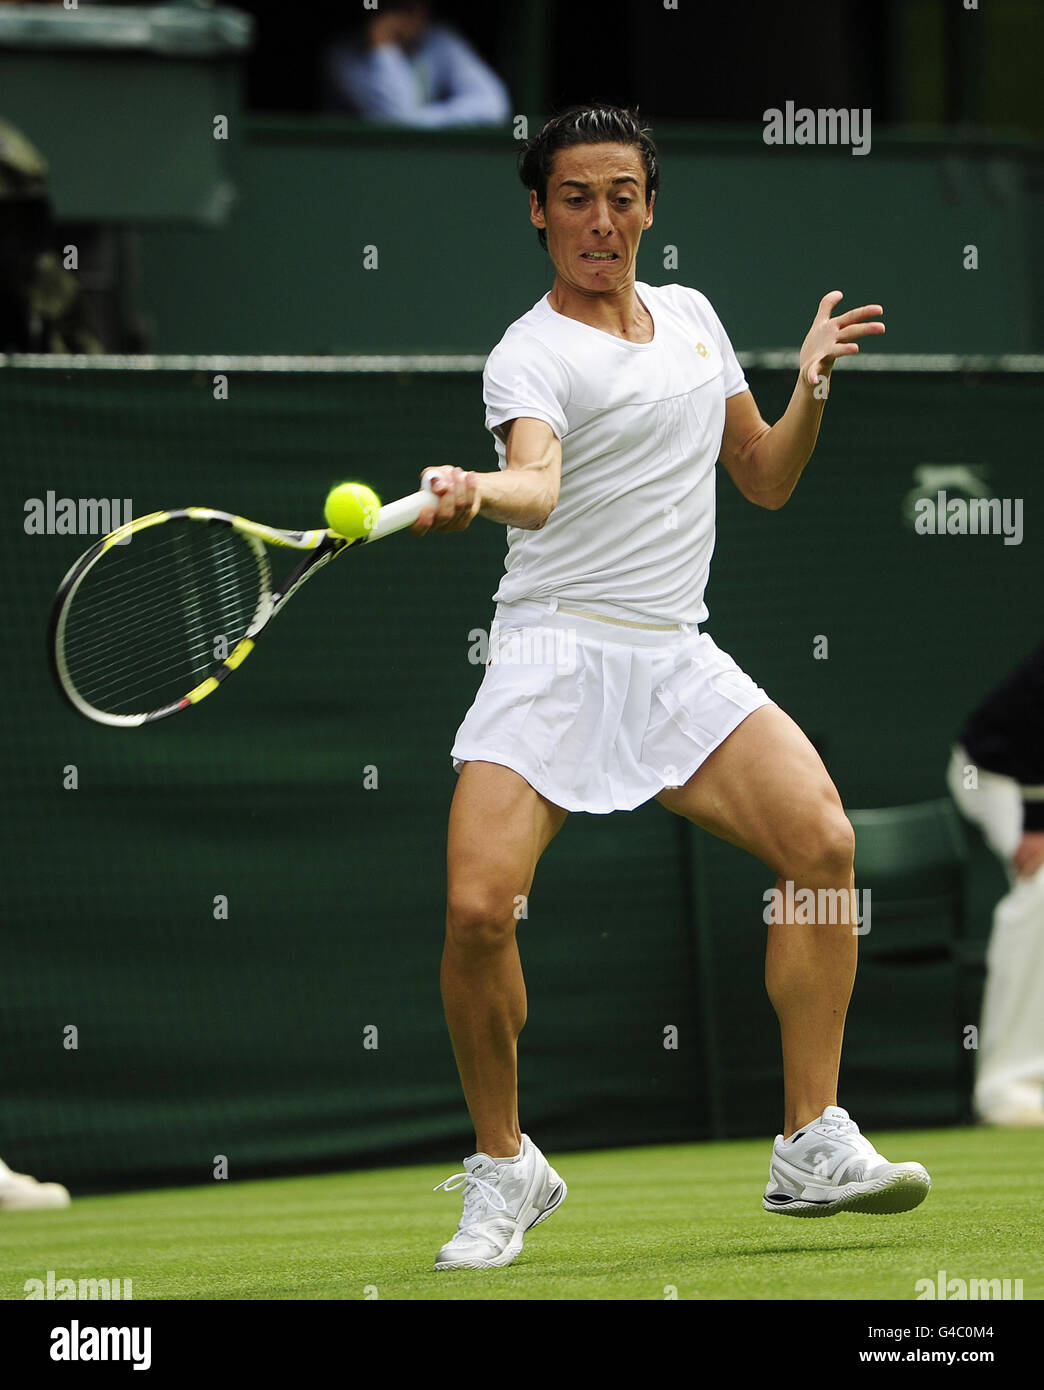 Italy's Francesca Schiavone in action against Australia's Jelena Dokic during the 2011 Wimbledon Championships at the all England Lawn Tennis and Croquet Club, Wimbledon. Stock Photo